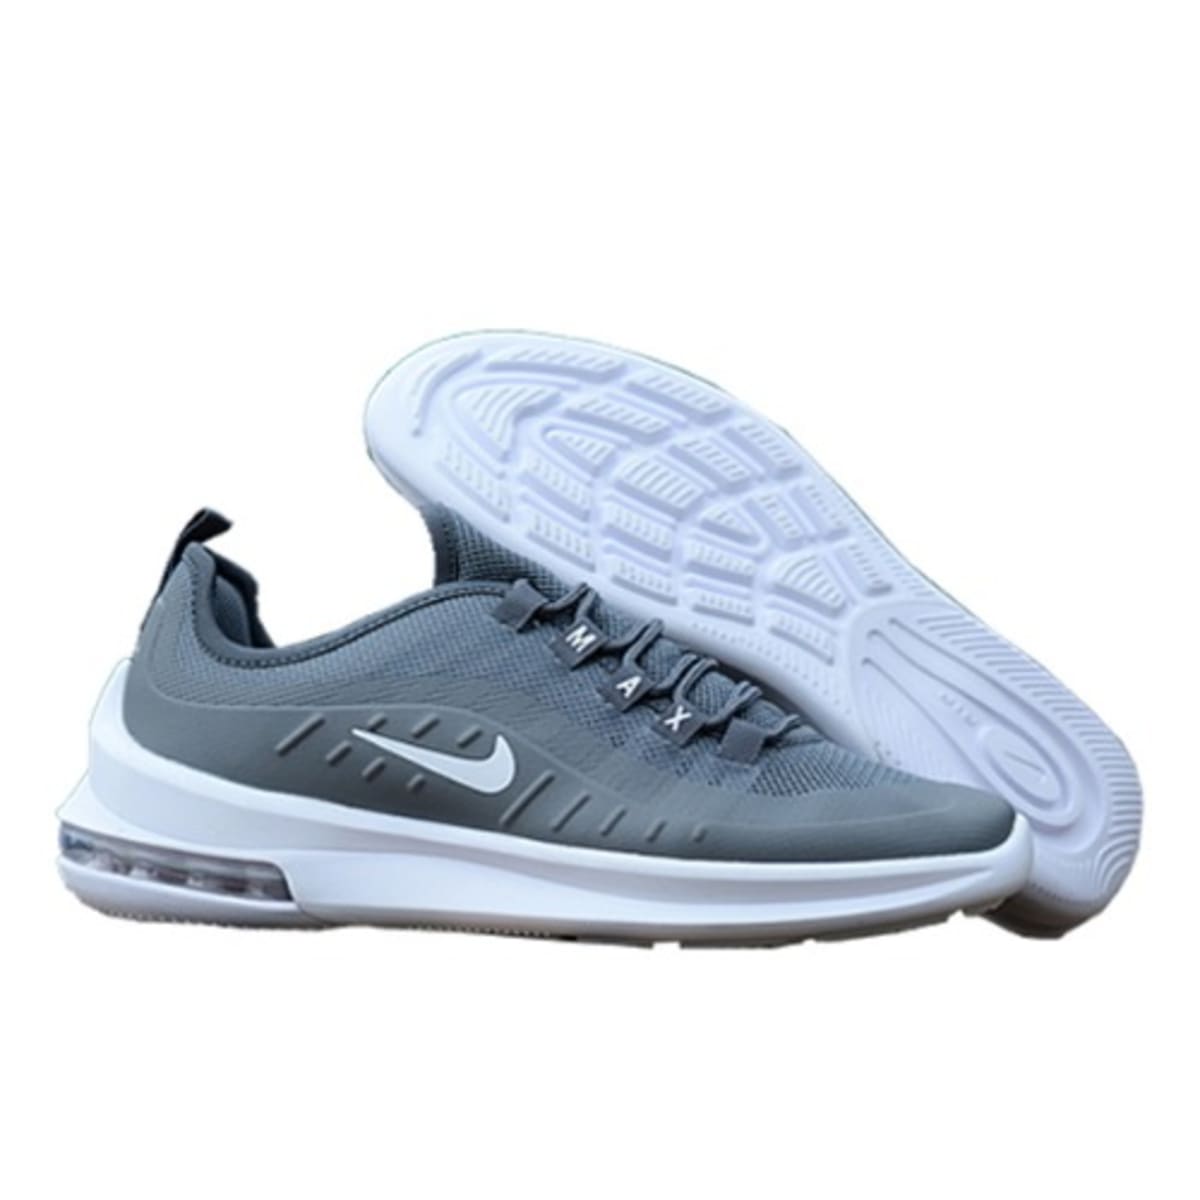 automaton Restate Hen Nike Air Max Axis Running Shoes | Konga Online Shopping